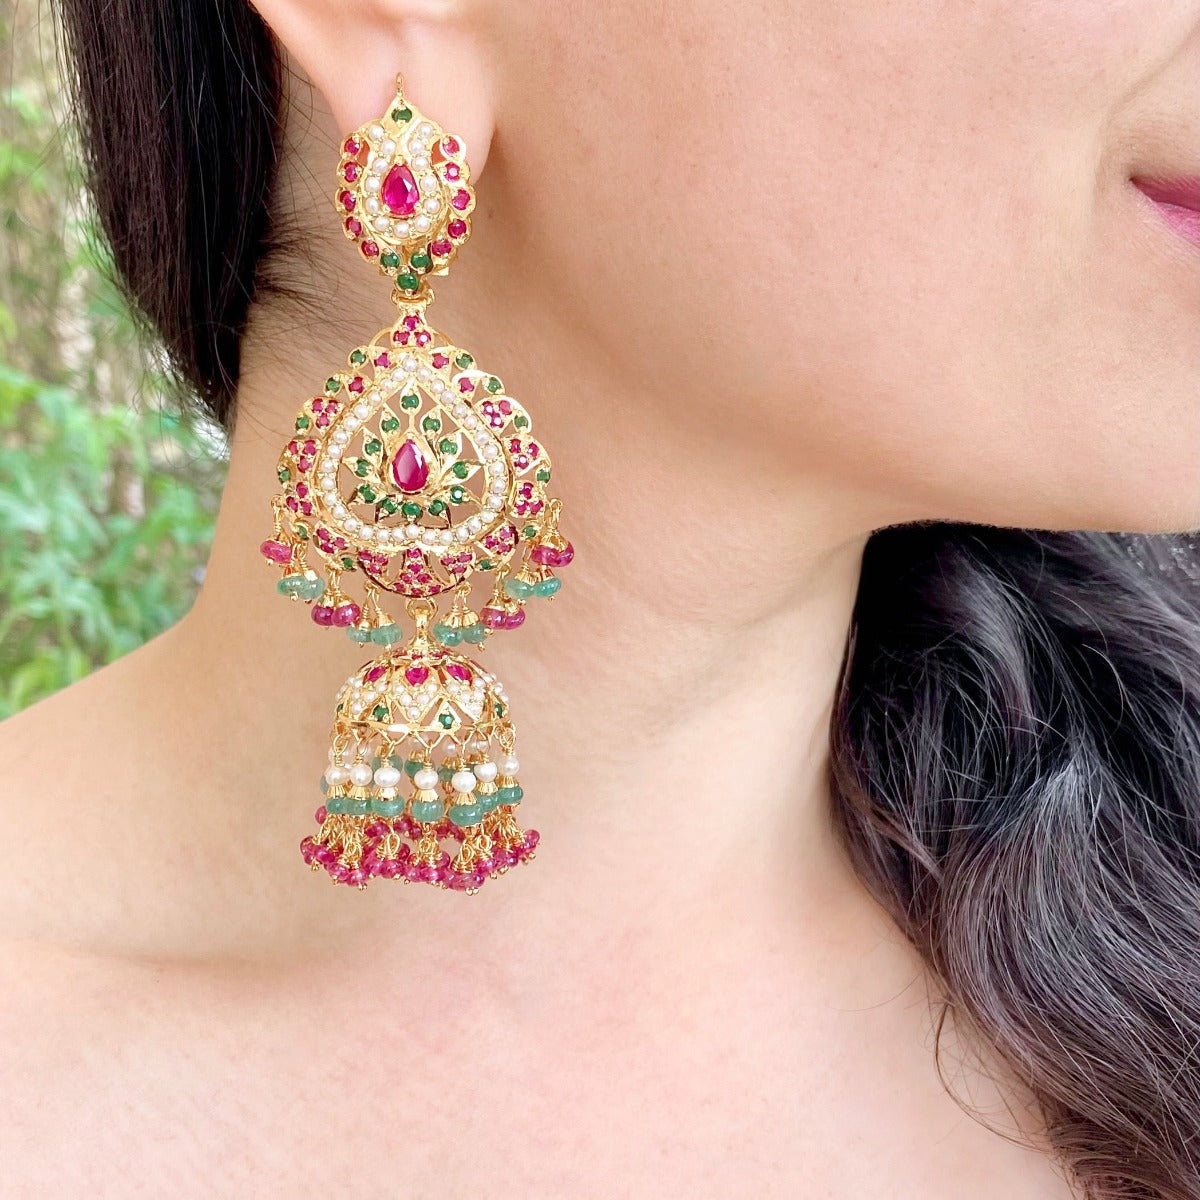 large earrings with jhumka at bottom